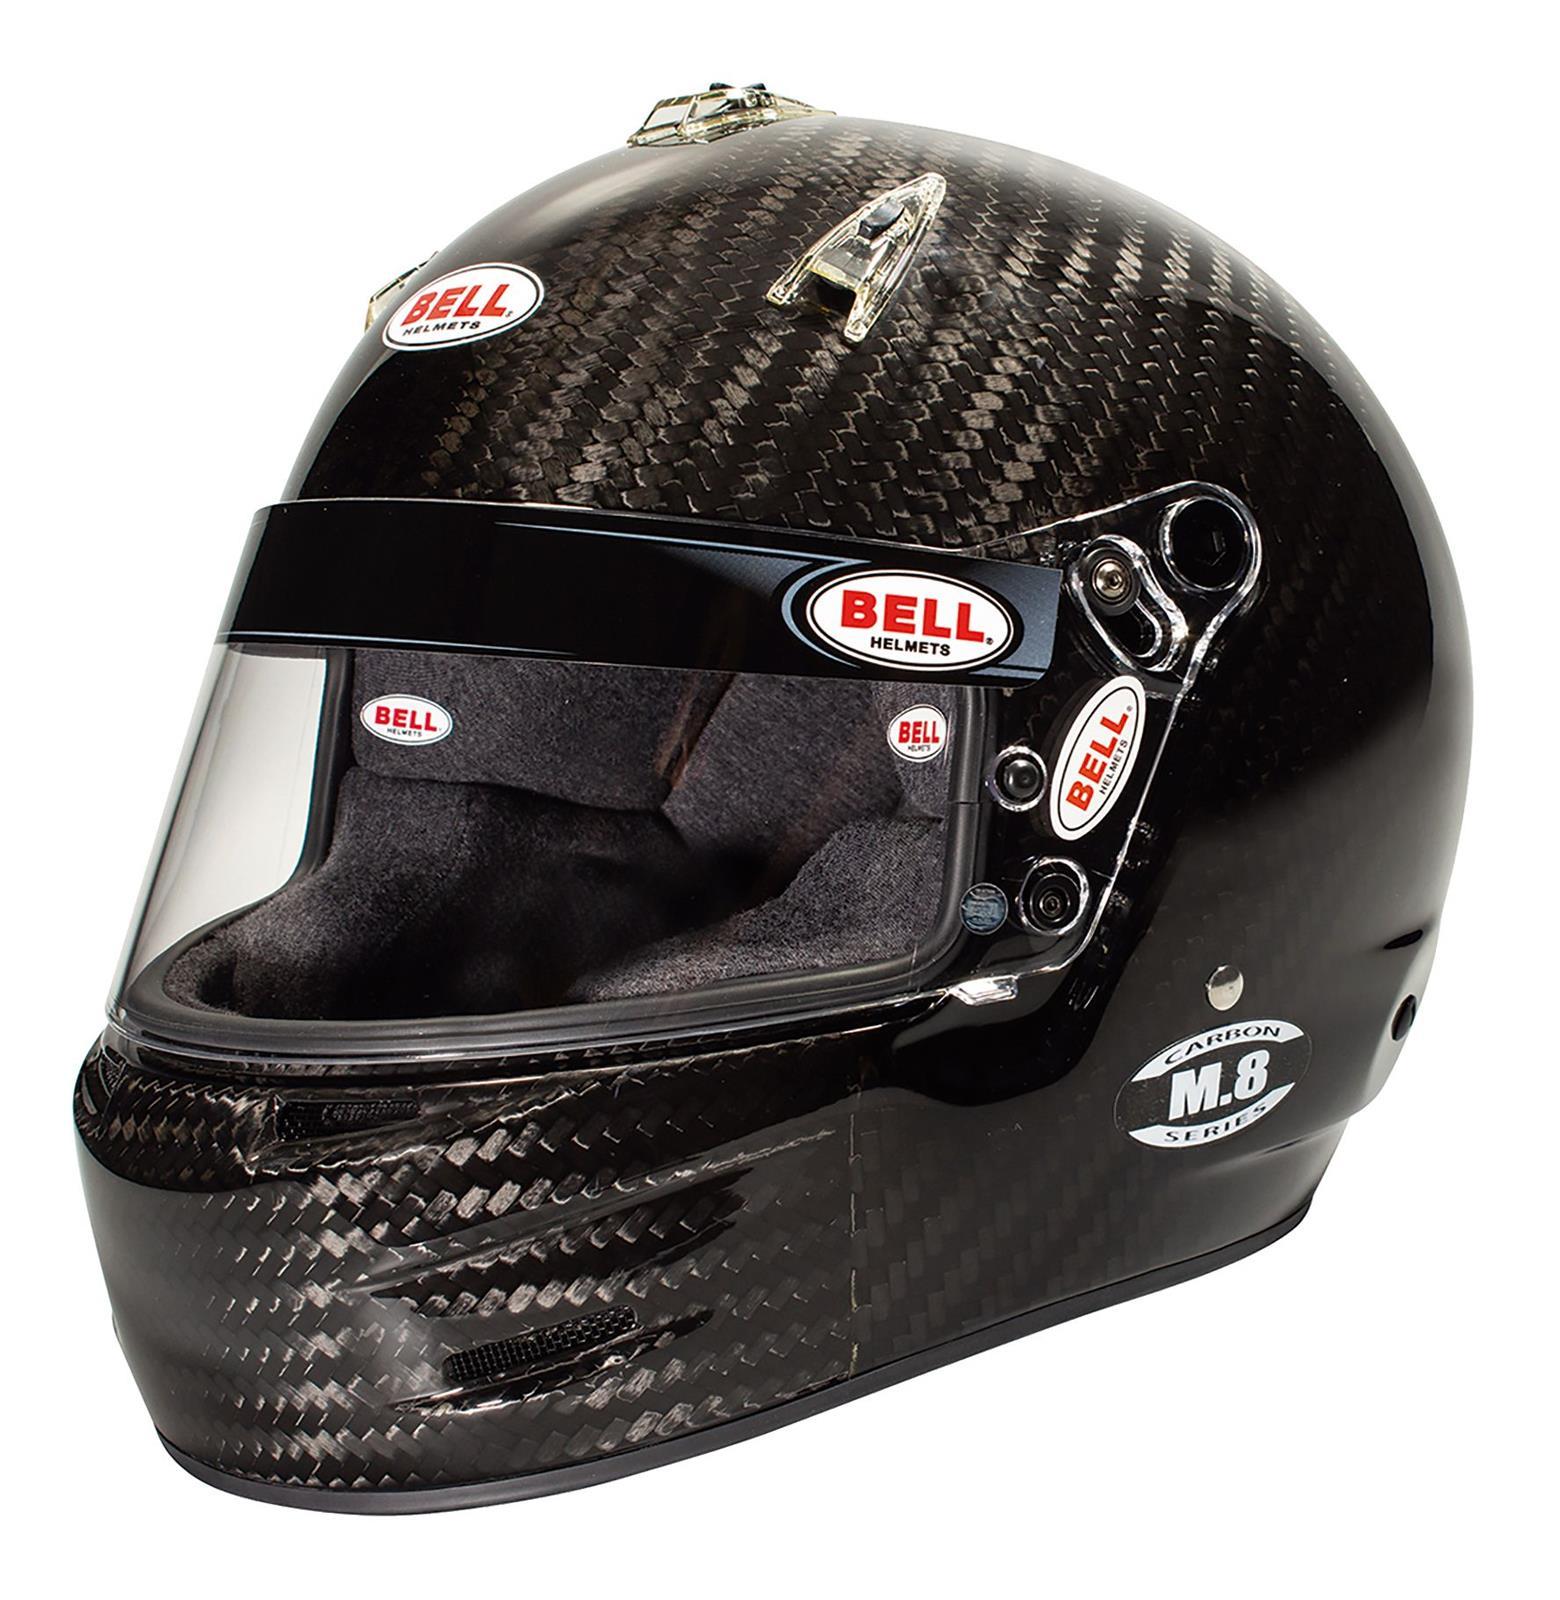 Bell Helmets 1208A04 Helmet, M8, Snell SA2020, FIA Approved, Head and Neck Support Ready, Carbon Fiber, Size 7-3/8, Each